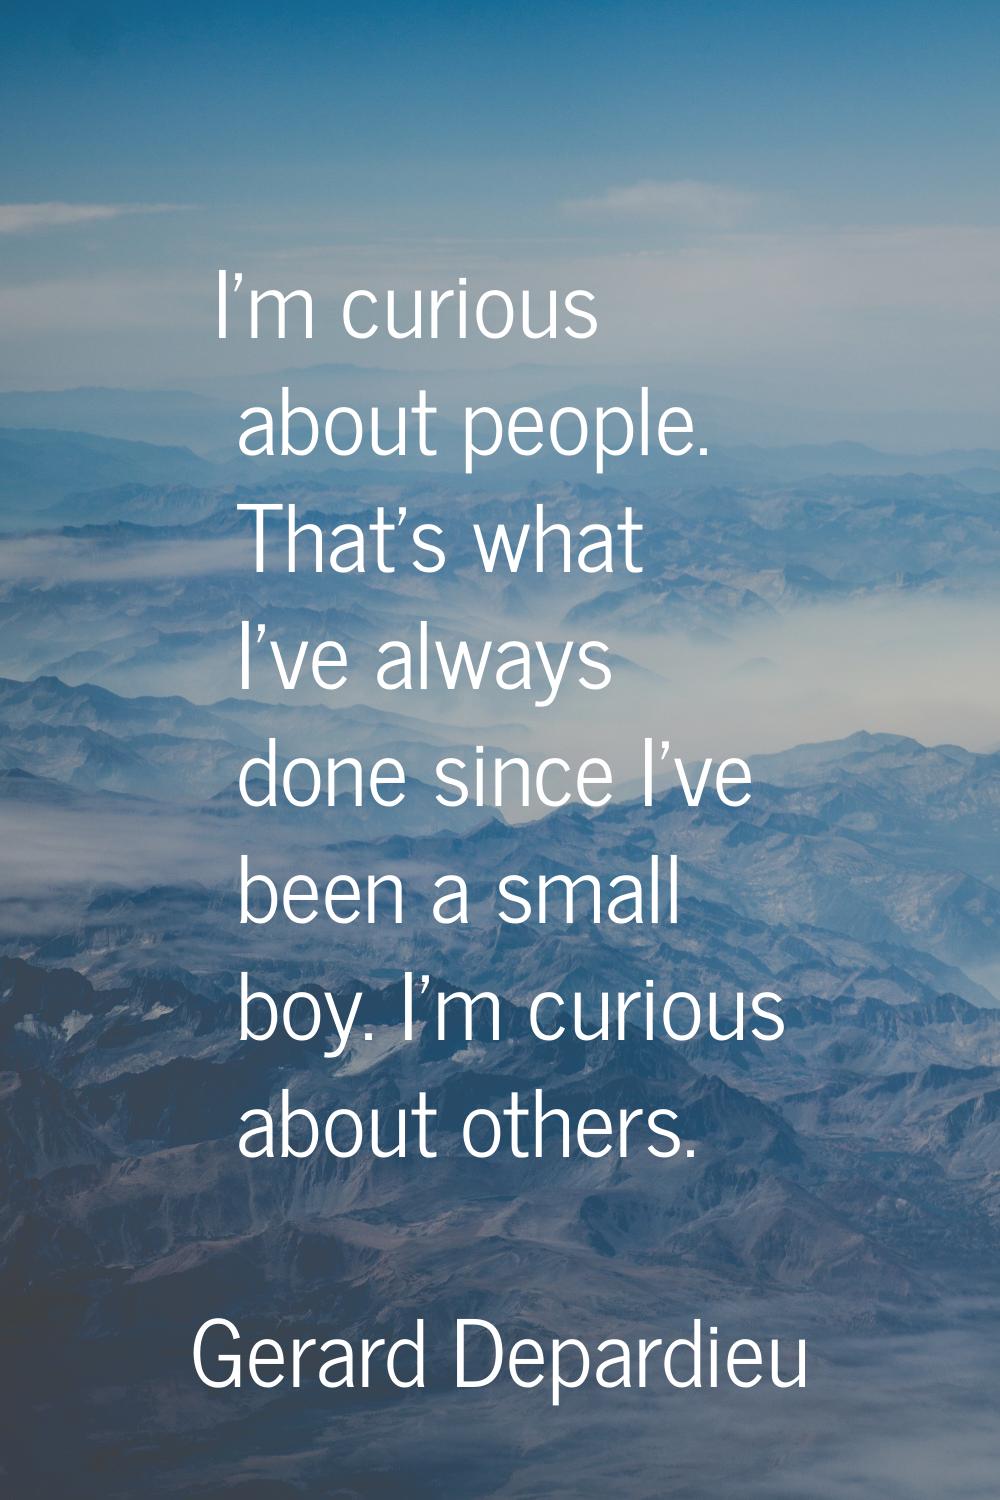 I'm curious about people. That's what I've always done since I've been a small boy. I'm curious abo